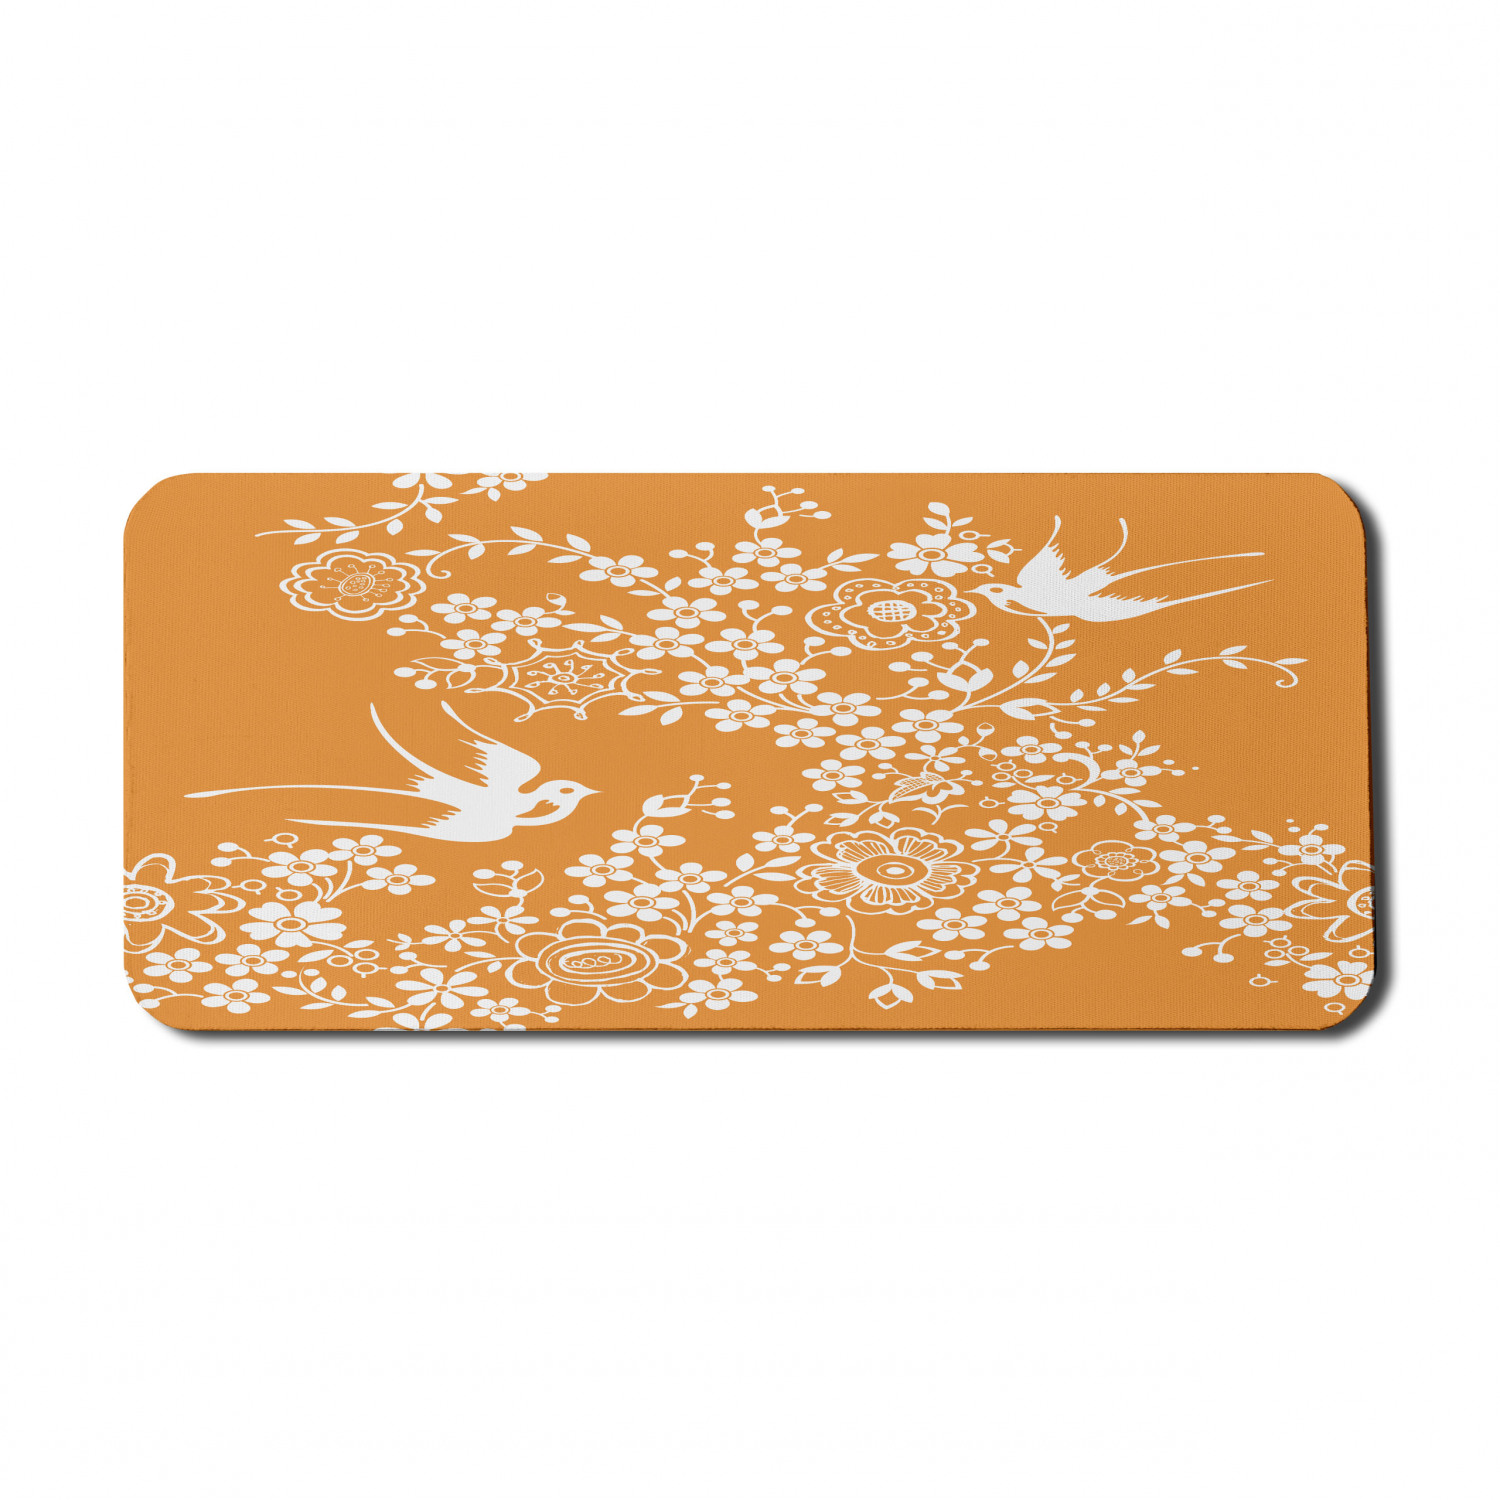 Japanese Computer Mouse Pad, Oriental Floral Japanese Style Flying Birds Pastel Colored Spring Pattern, Rectangle Non-Slip Rubber Mousepad X-Large, 35" x 15" Gaming Size, Marigold White, by Ambesonne - image 1 of 2